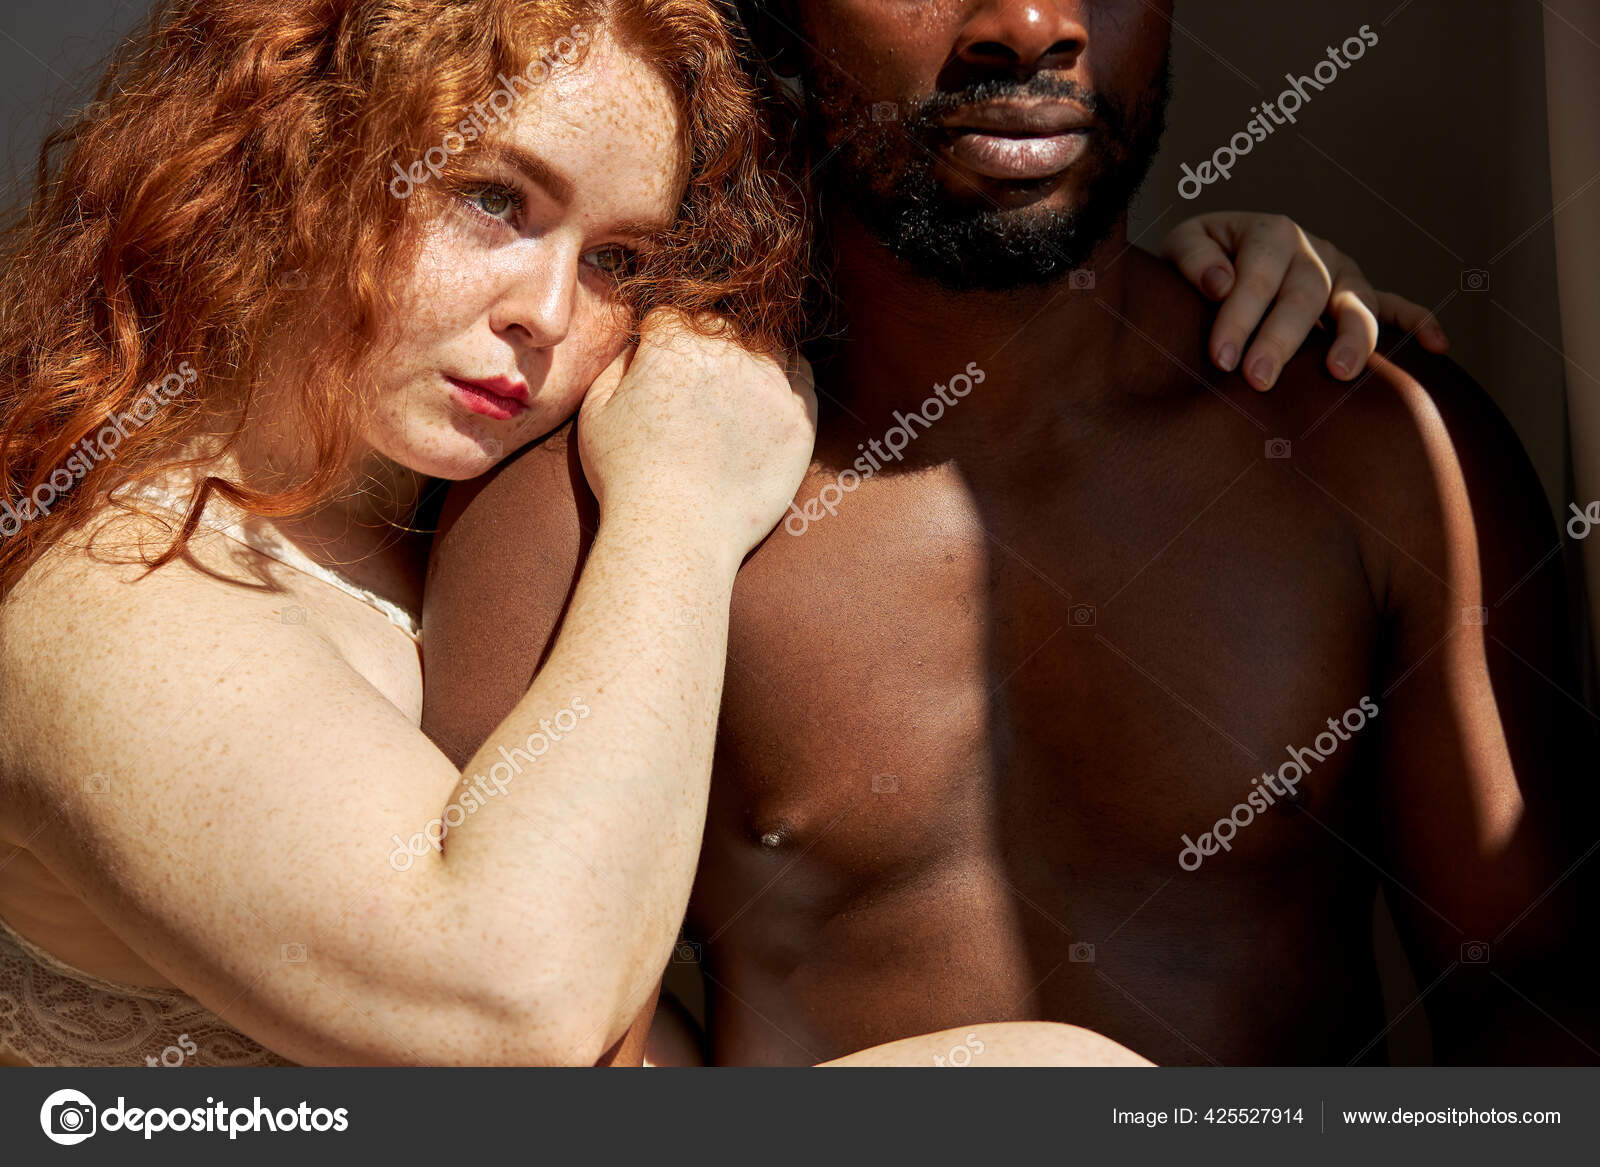 interracial wife redhead lover pictures Fucking Pics Hq